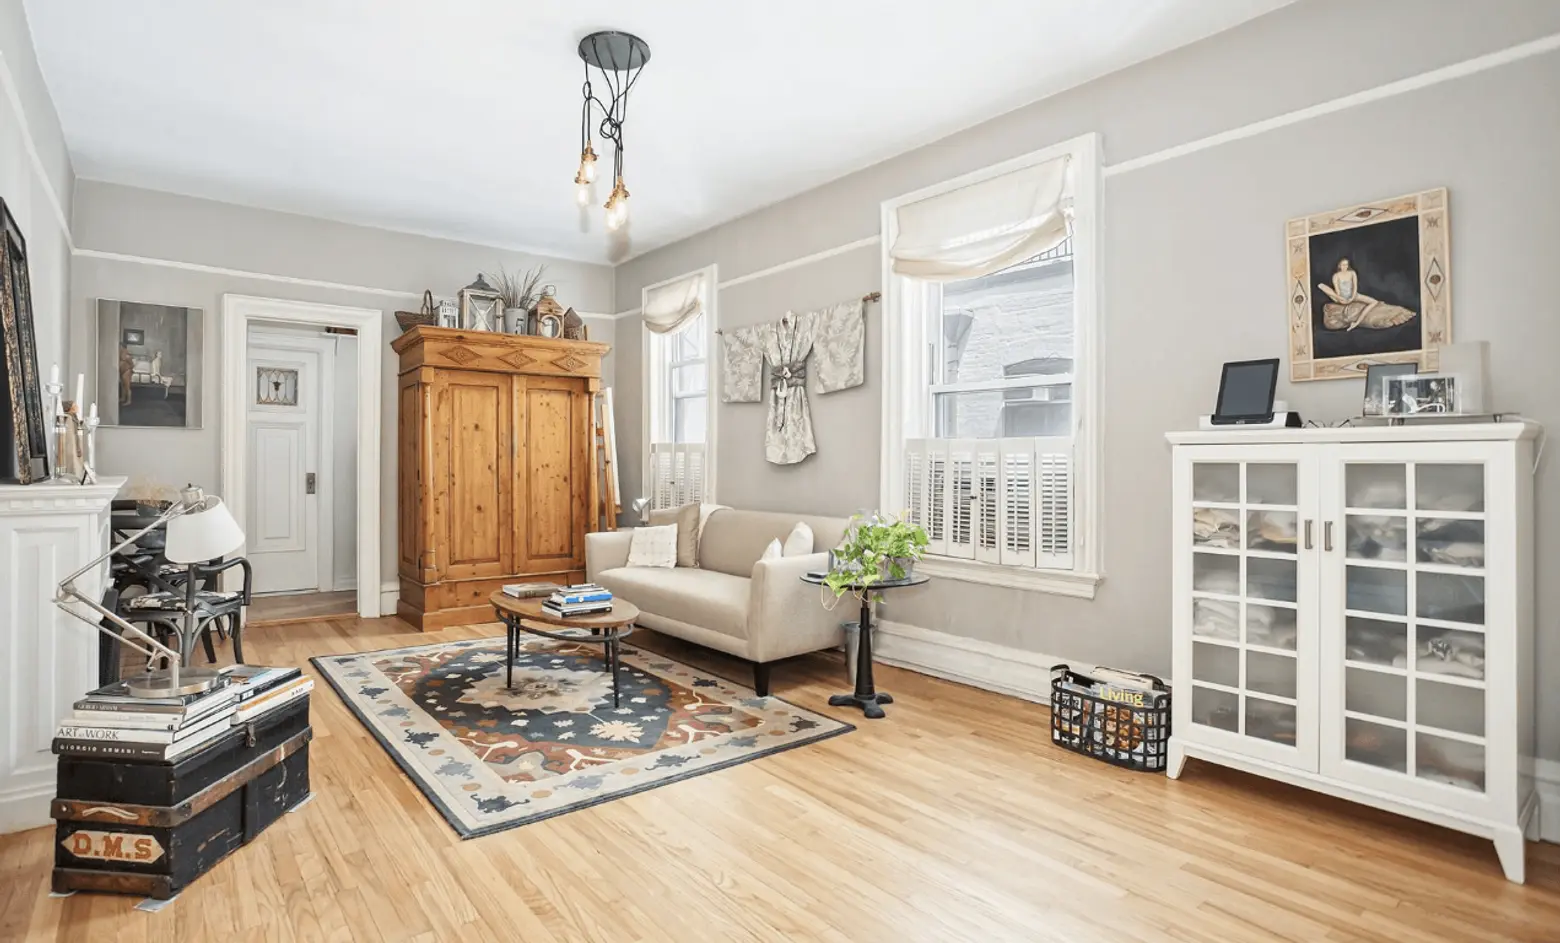 A top-floor Madison Avenue studio a block from the park for $460K? Yes, it’s true.